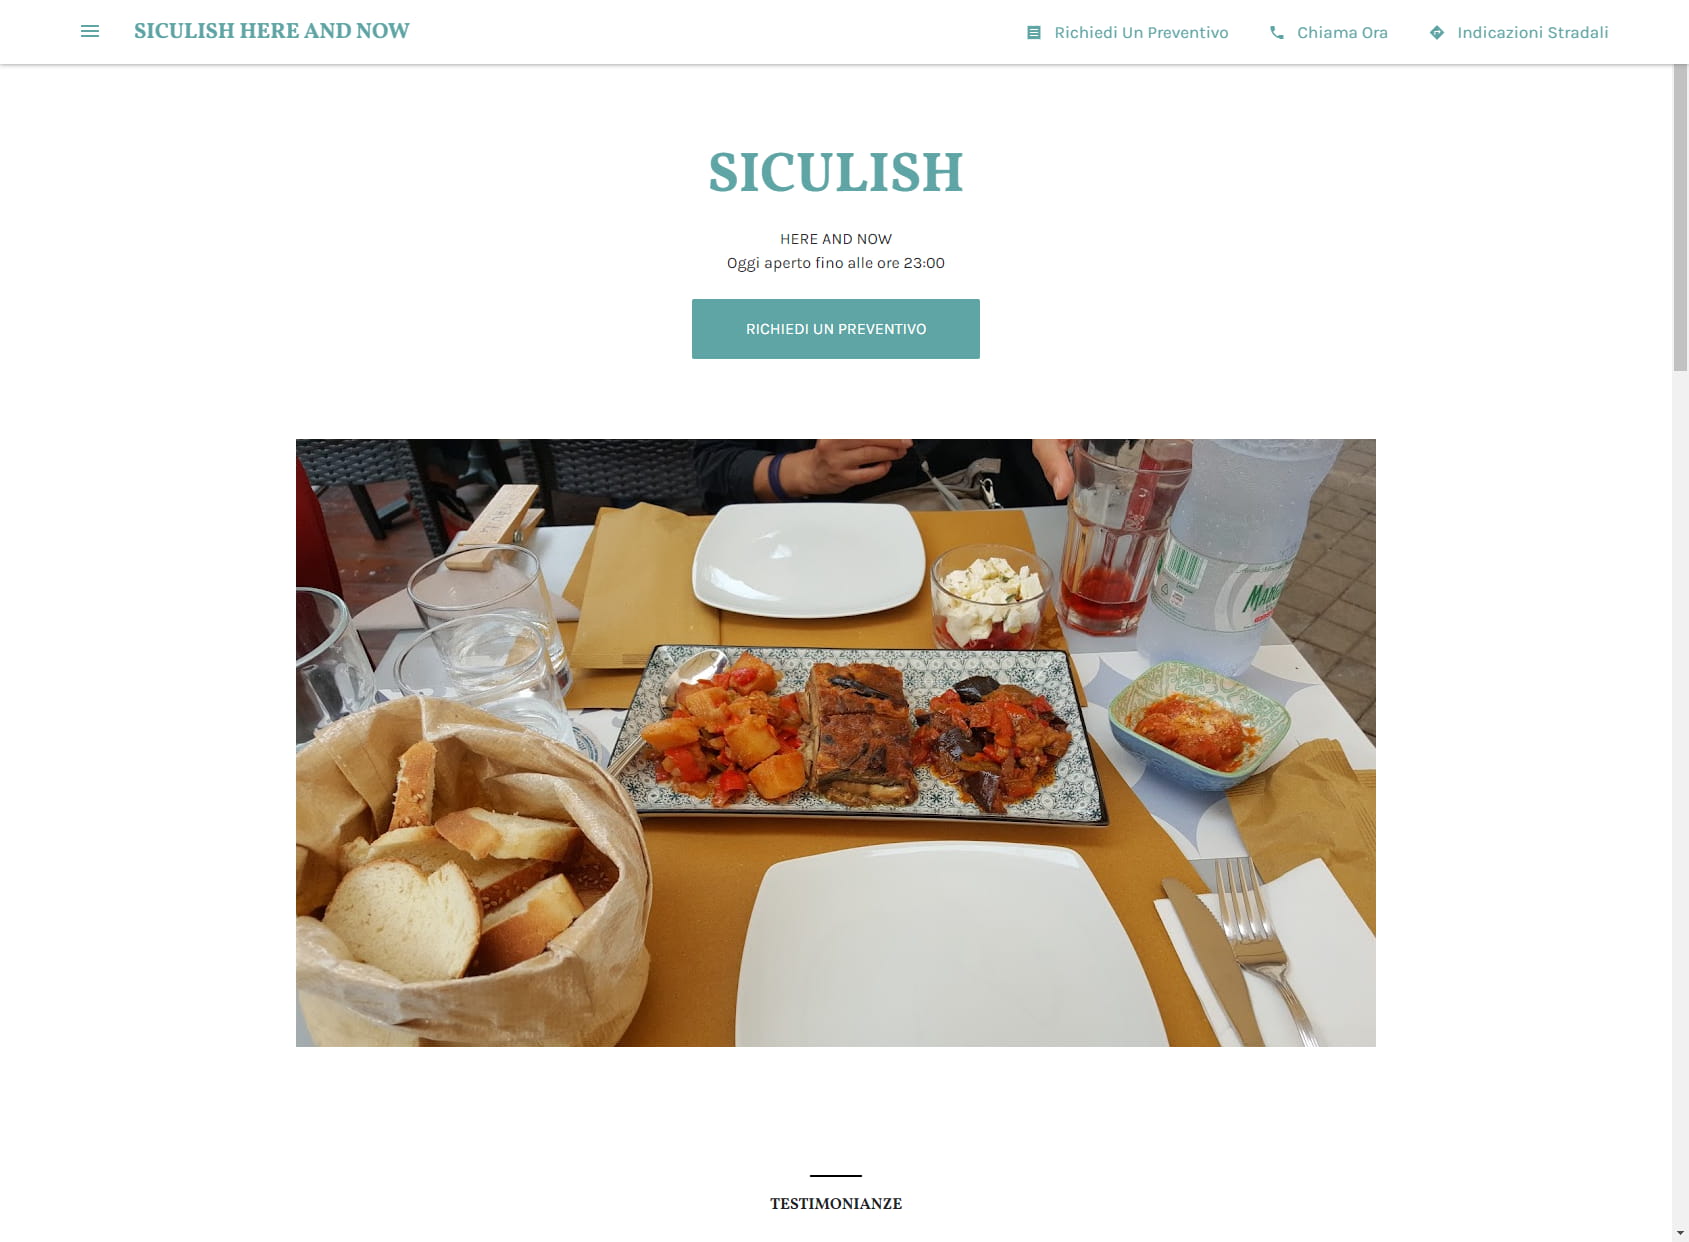 SICULISH HERE AND NOW